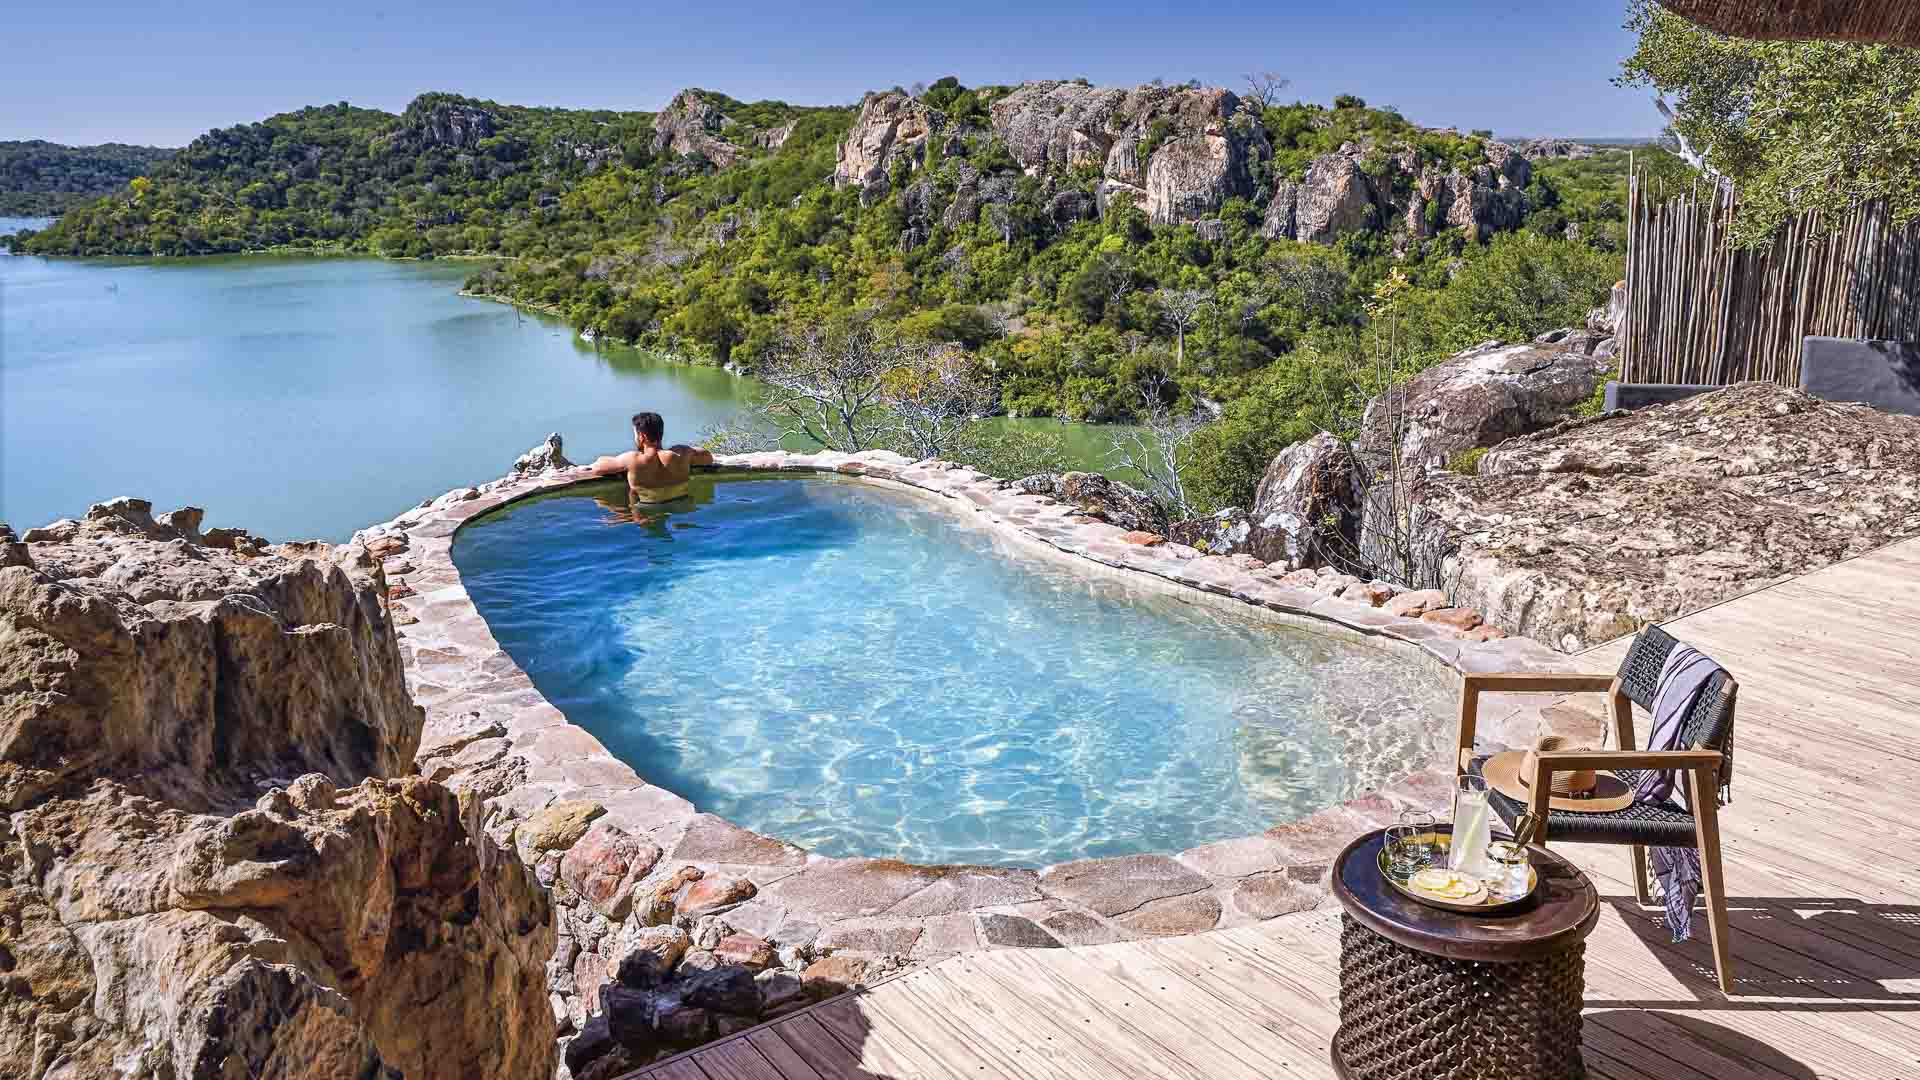 Views from a plunge pool simply don’t get better - Singita Pamushana Lodge is an excellent choice for a Southern Africa safari off the beaten track.